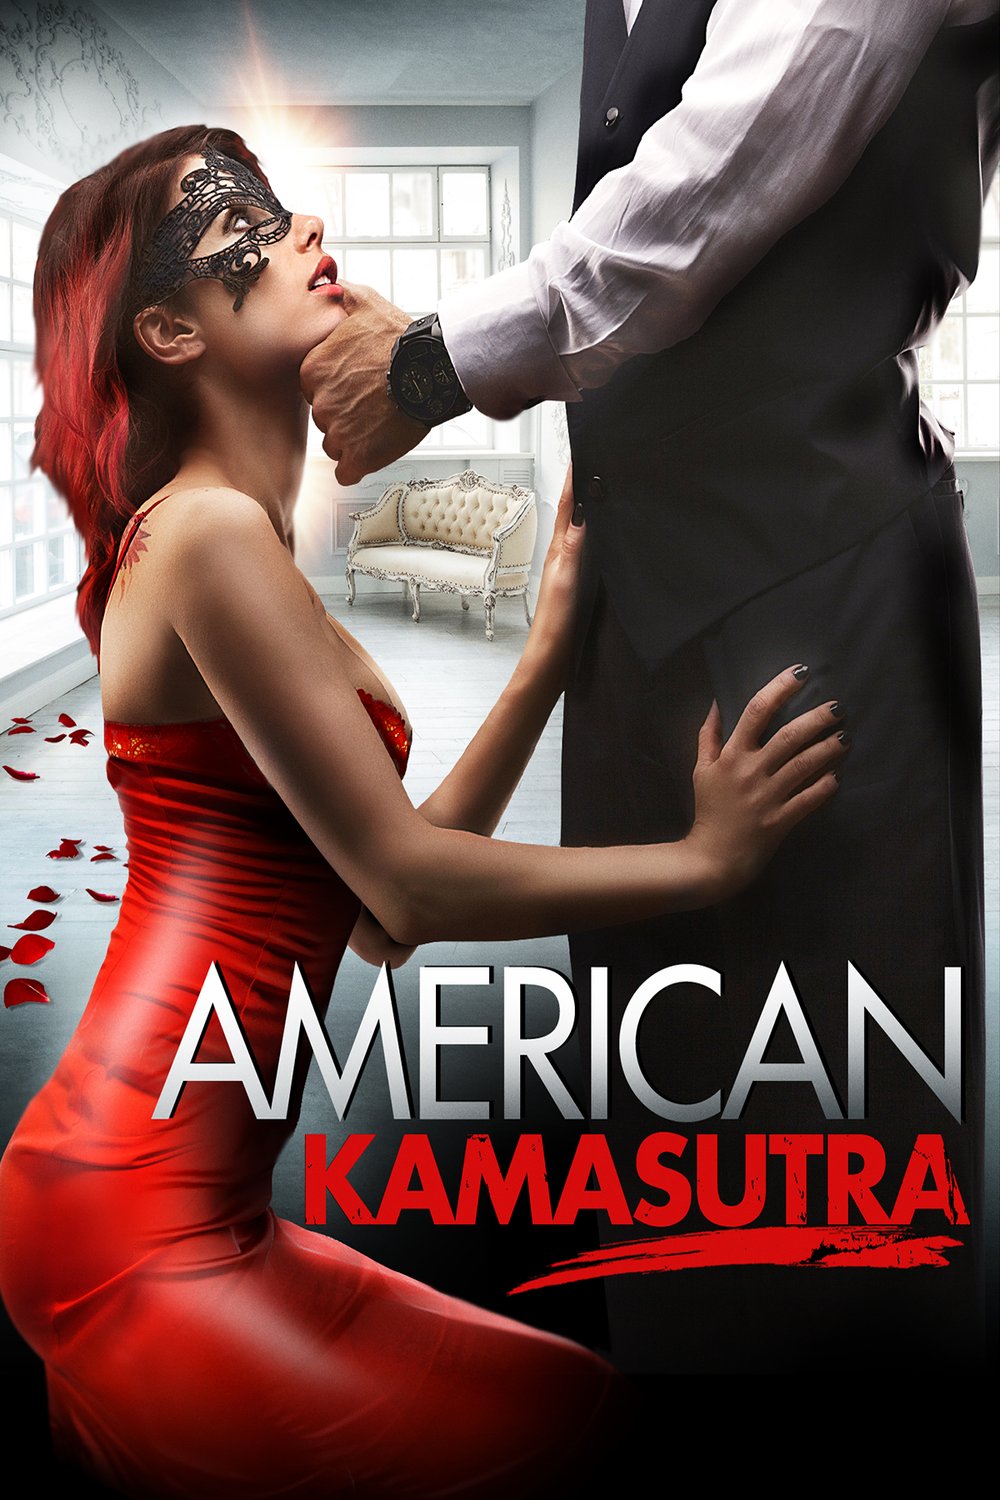 Poster of the movie American Kamasutra